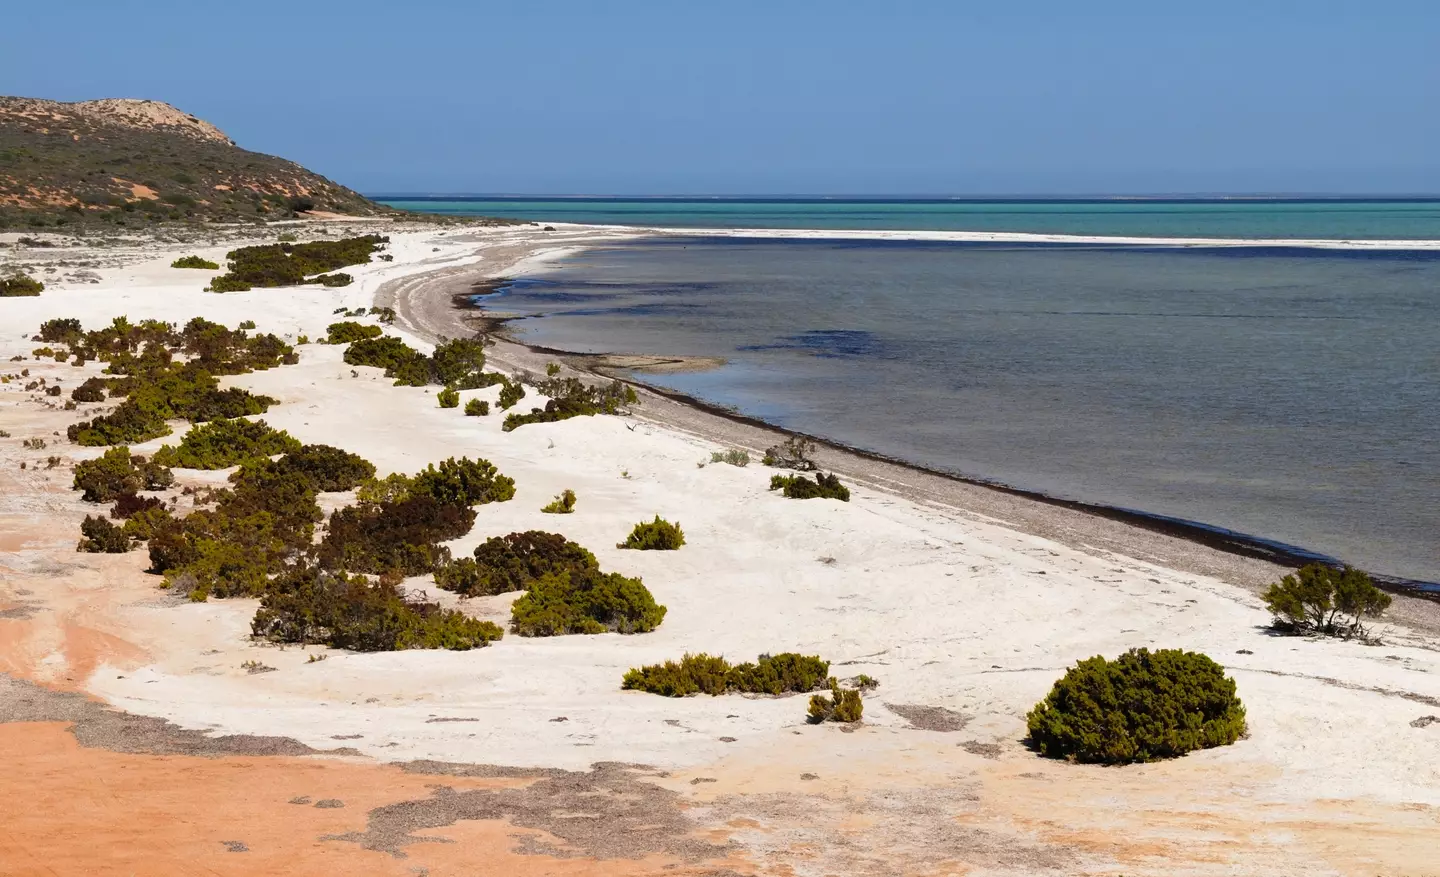 The plant was found in Australia’s Shark Bay World Heritage Area.